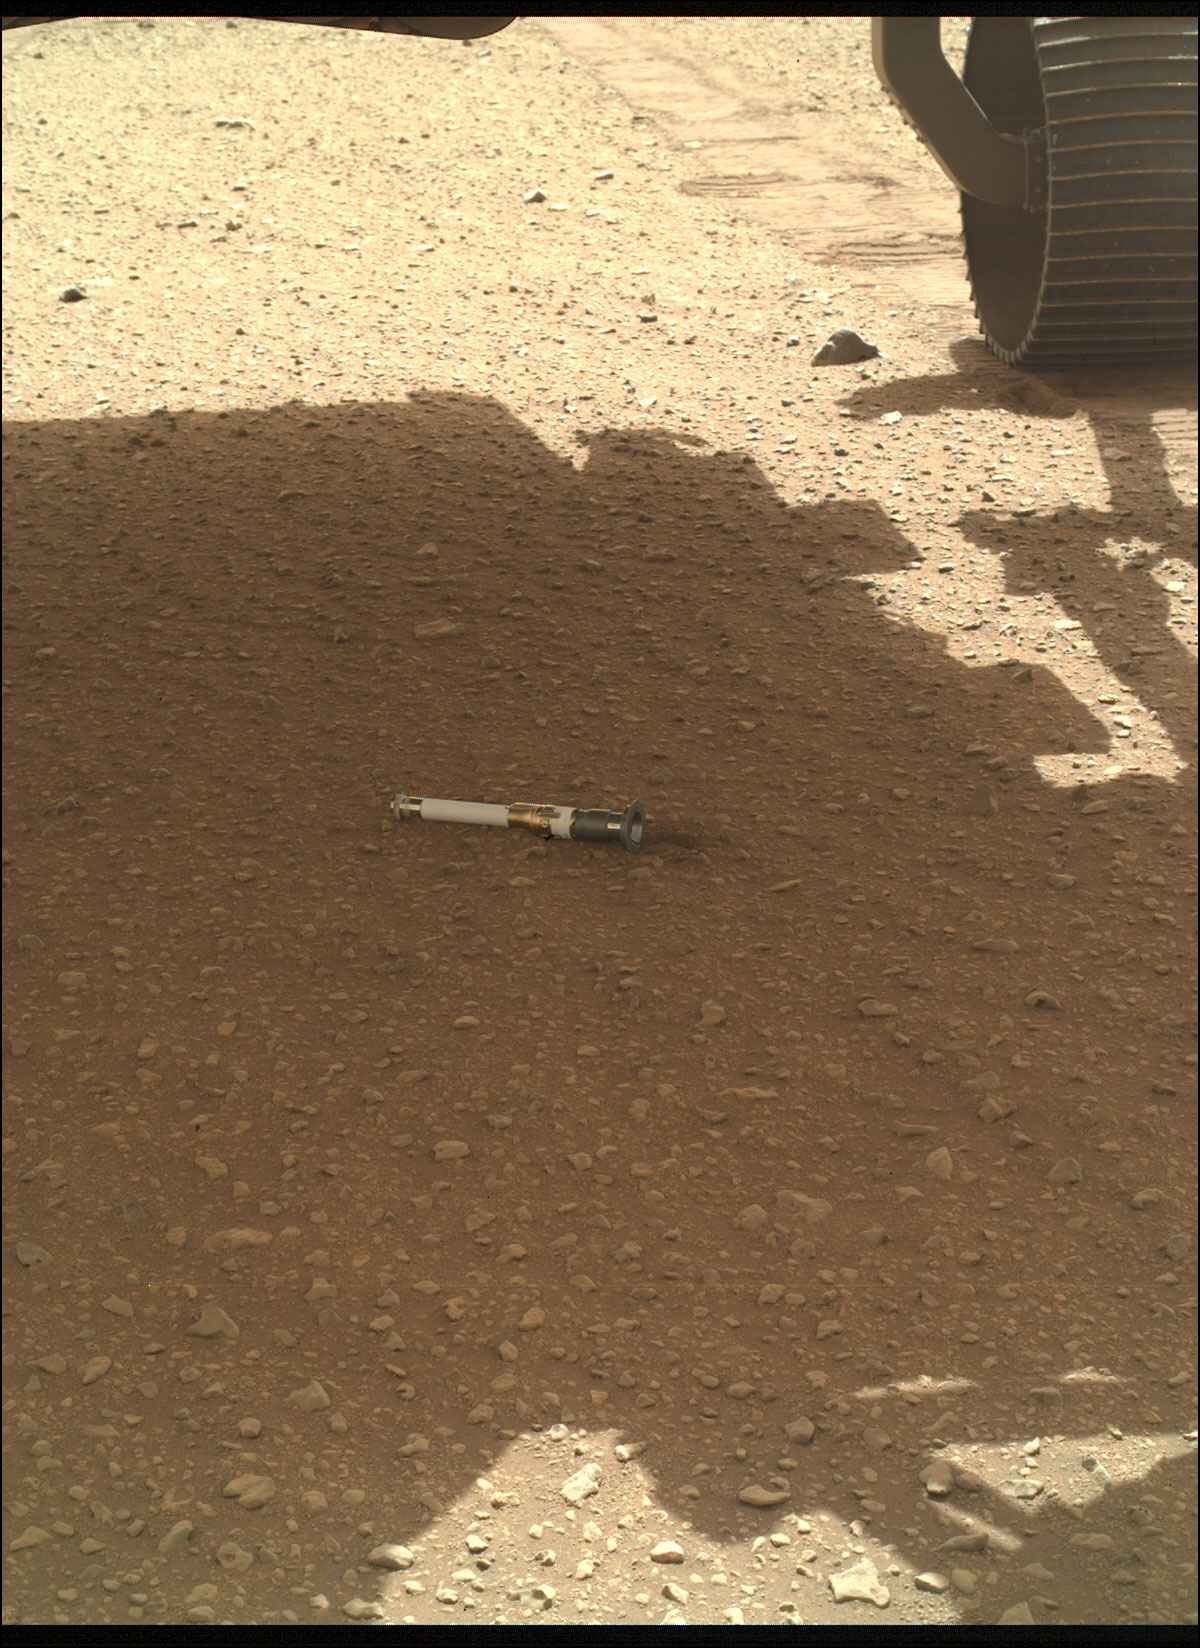 NASA’s Perseverance rover deposited the first of several samples onto the Martian surface on Dec. 20, 2022, the 652nd Martian day, or sol, of the mission.